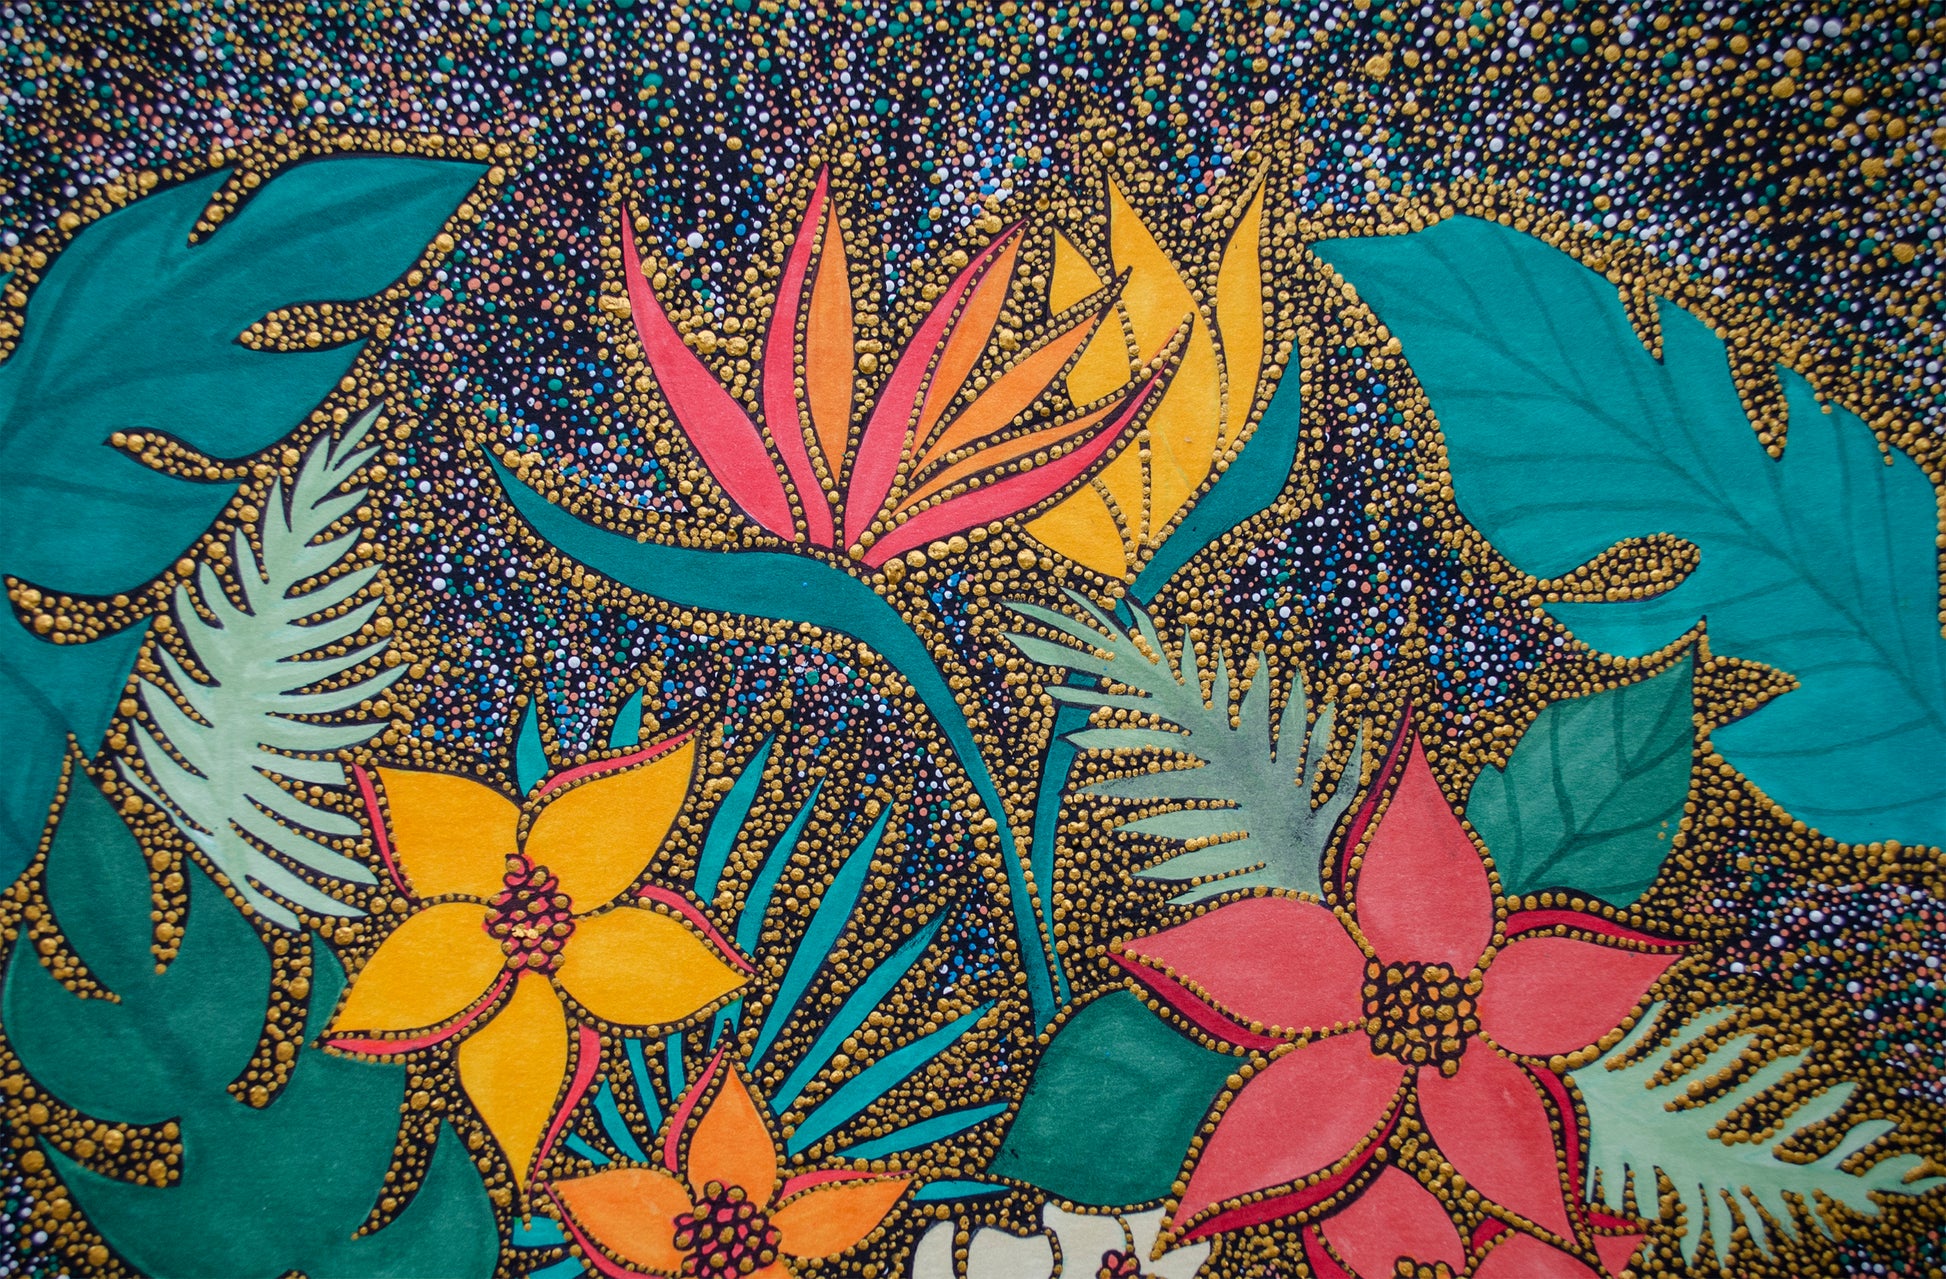 Flowers, tropical flowers, tropical, jewels, pointillism, painting, canvas, contemporary art, nature art, mixed media, art gallery, wall art, wall decor